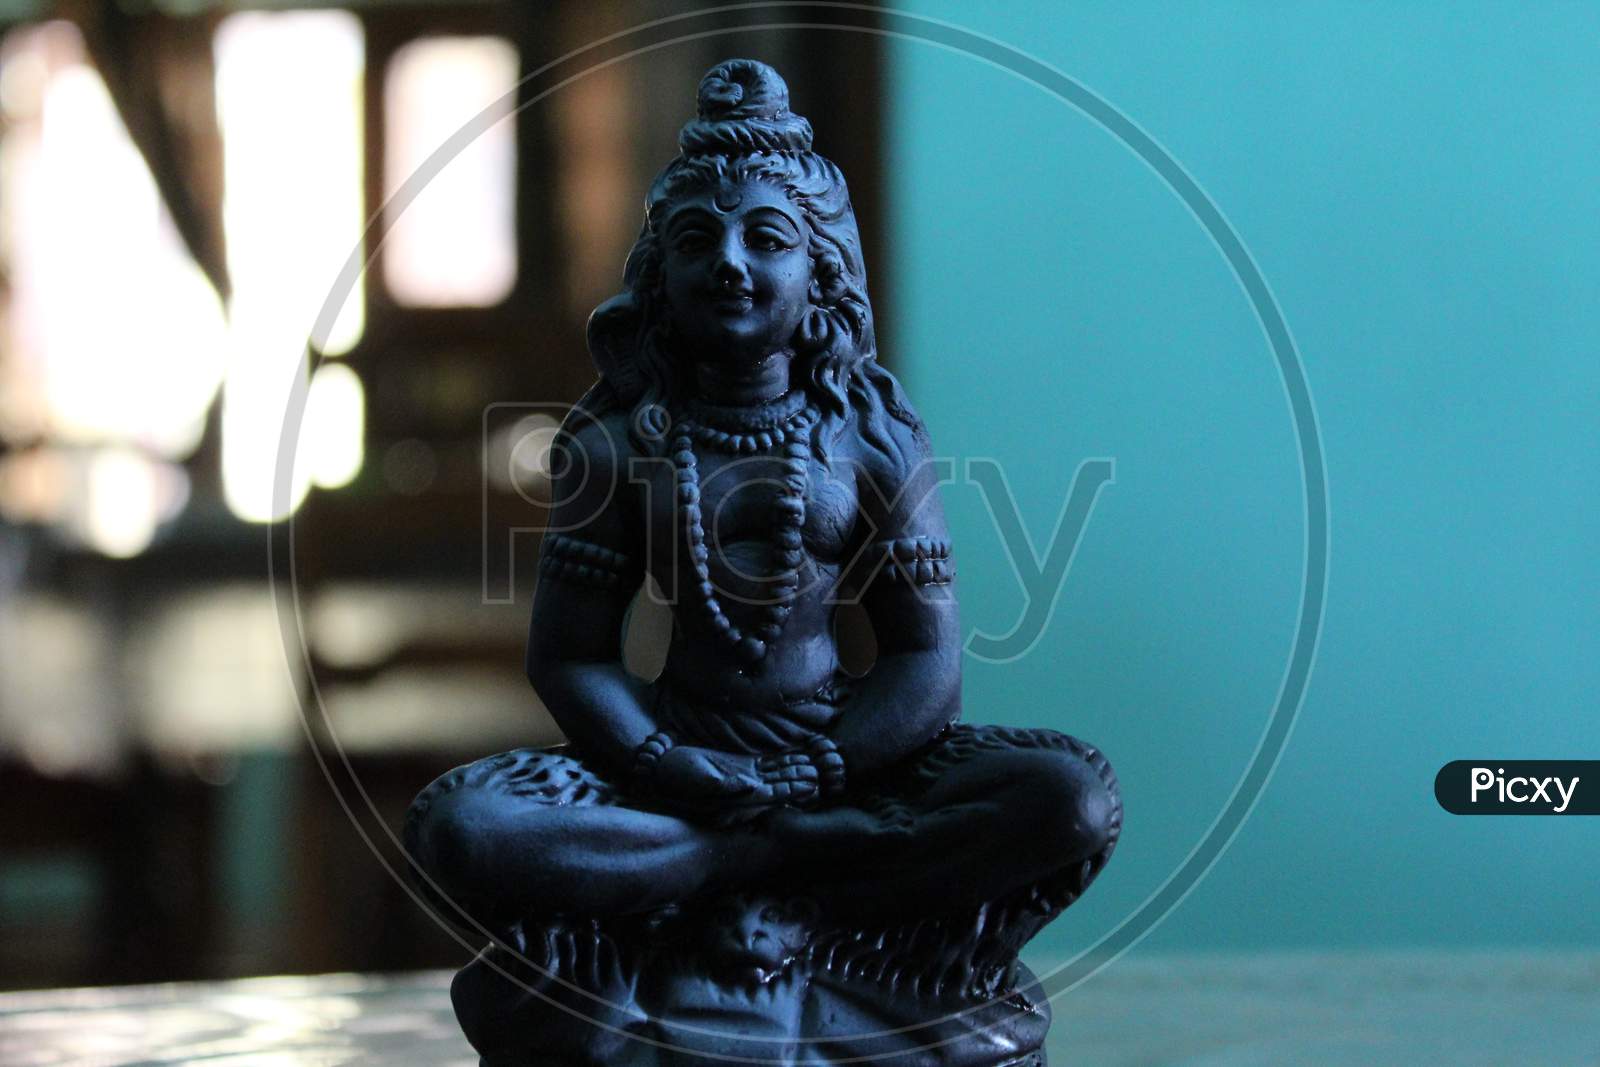 Stone Carving of Lord Shiva